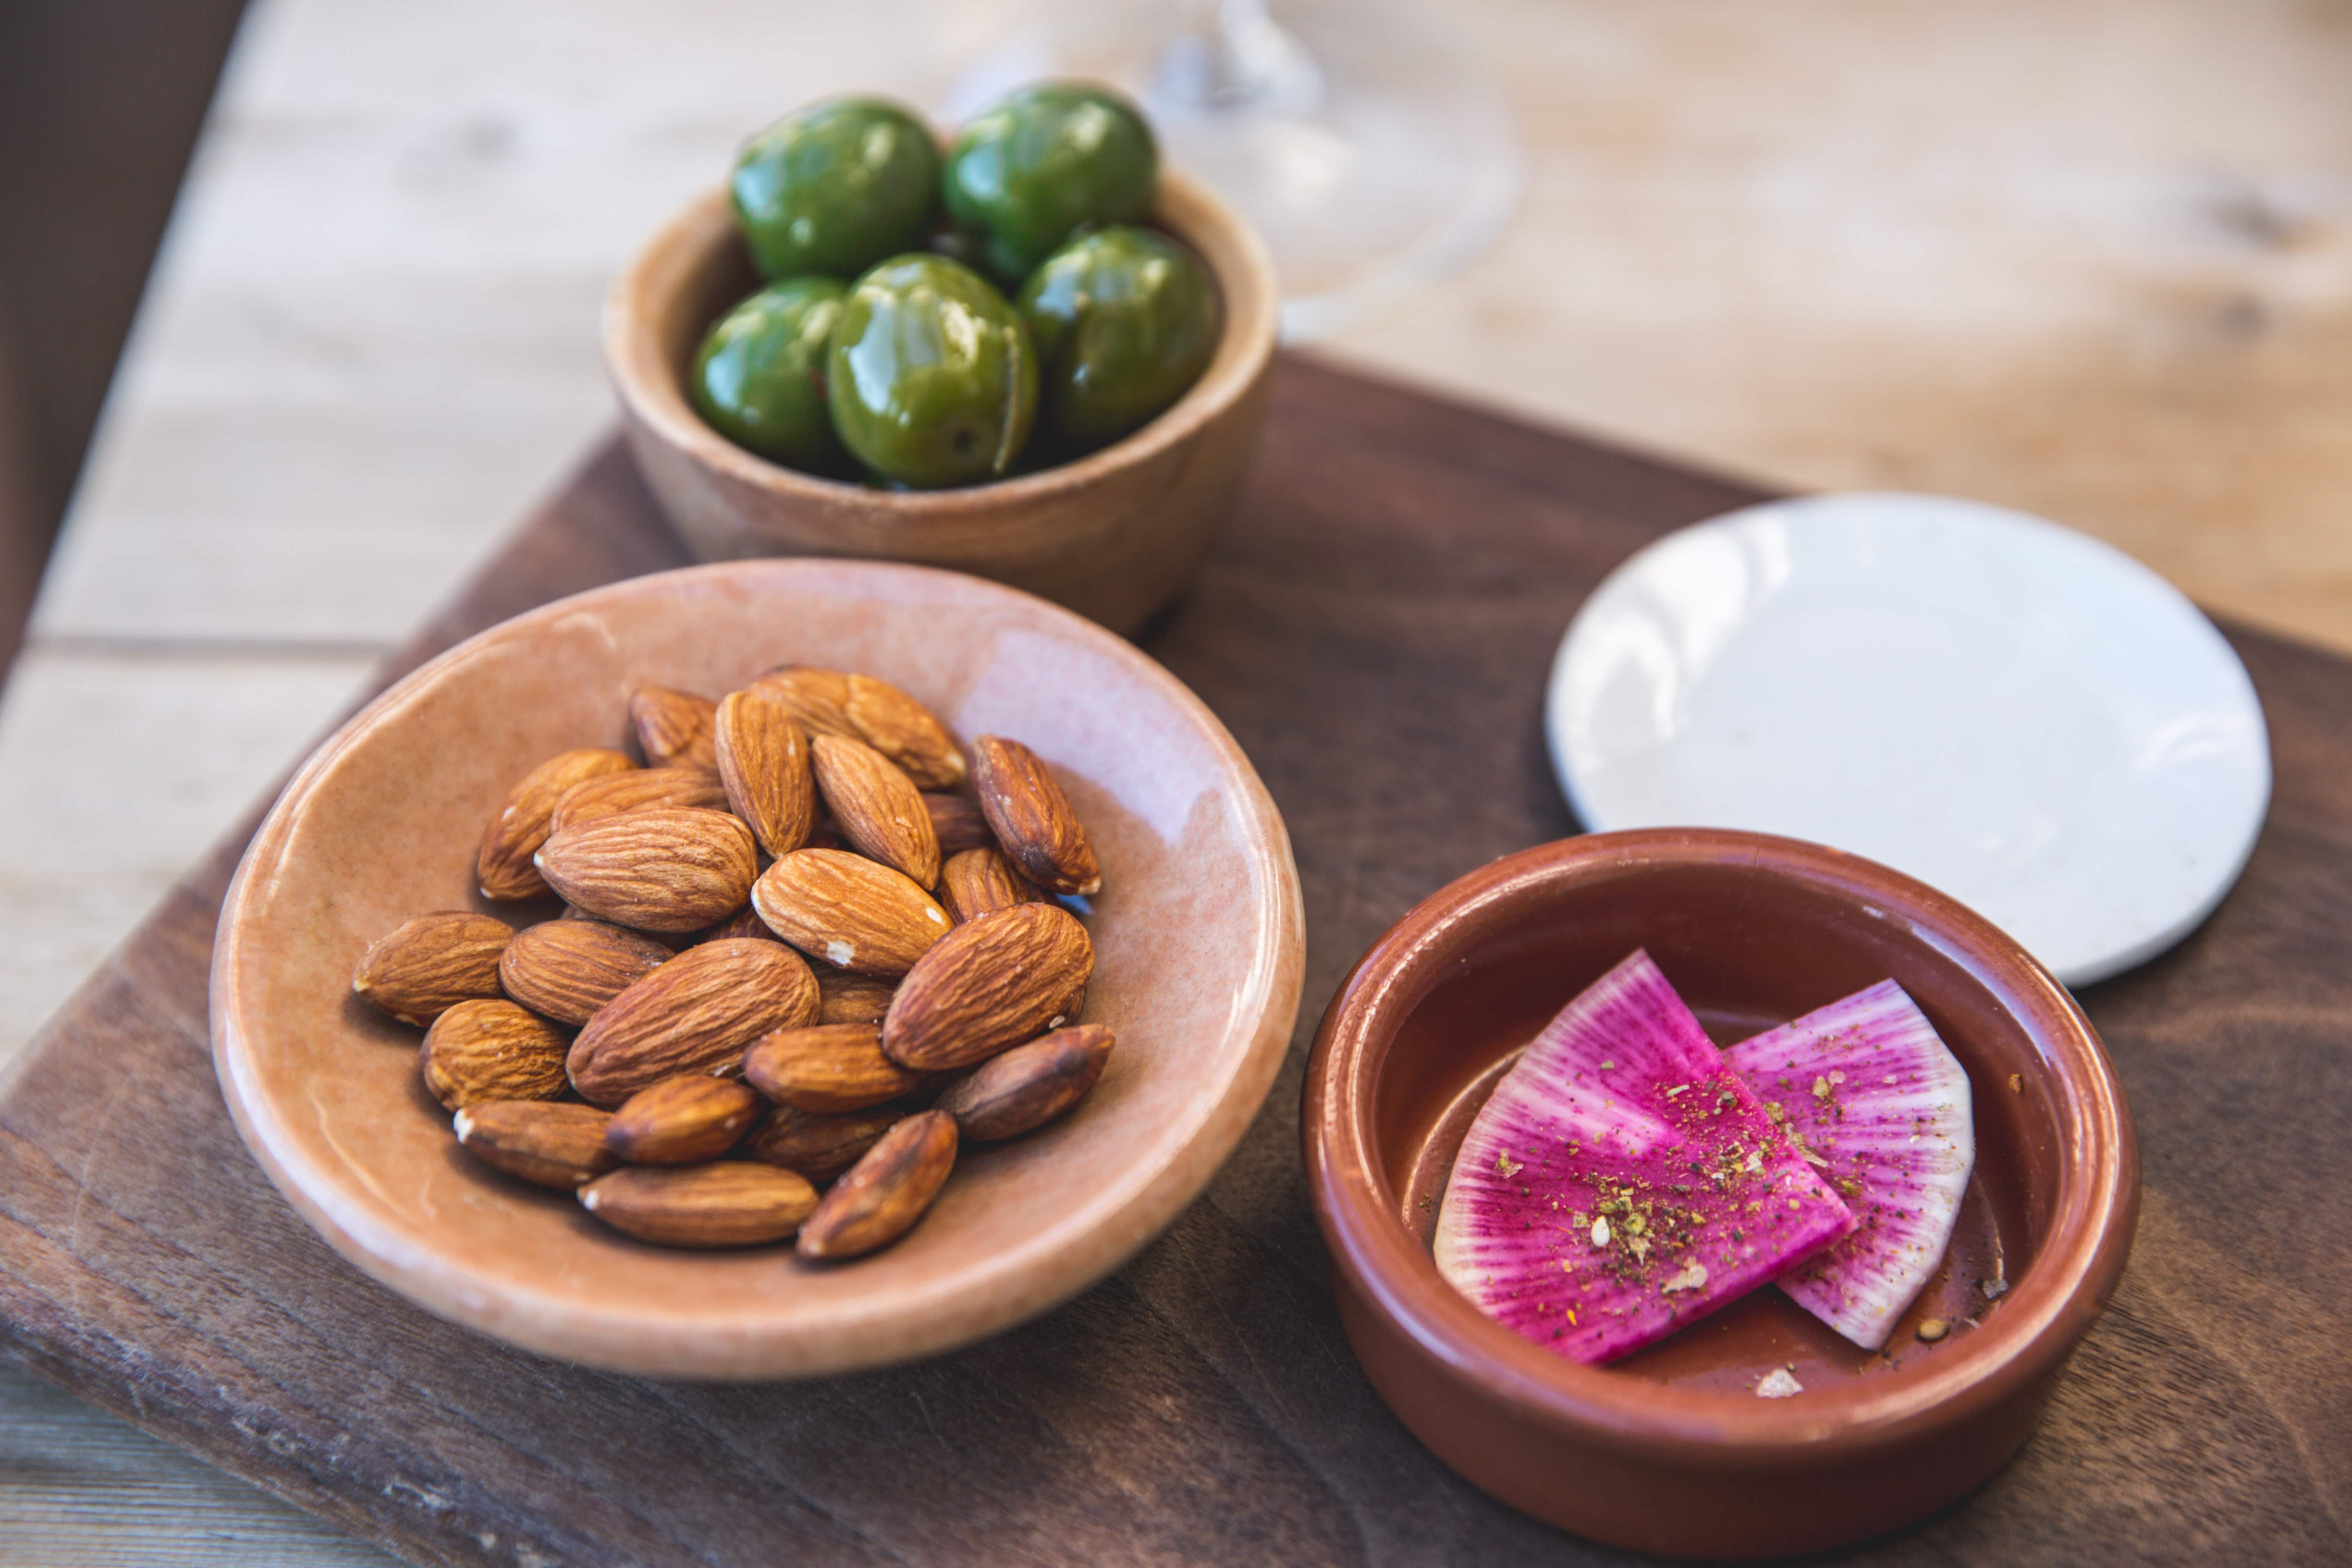  almonds, olives and radish in small ceramic dishes as a low FODMAP snack